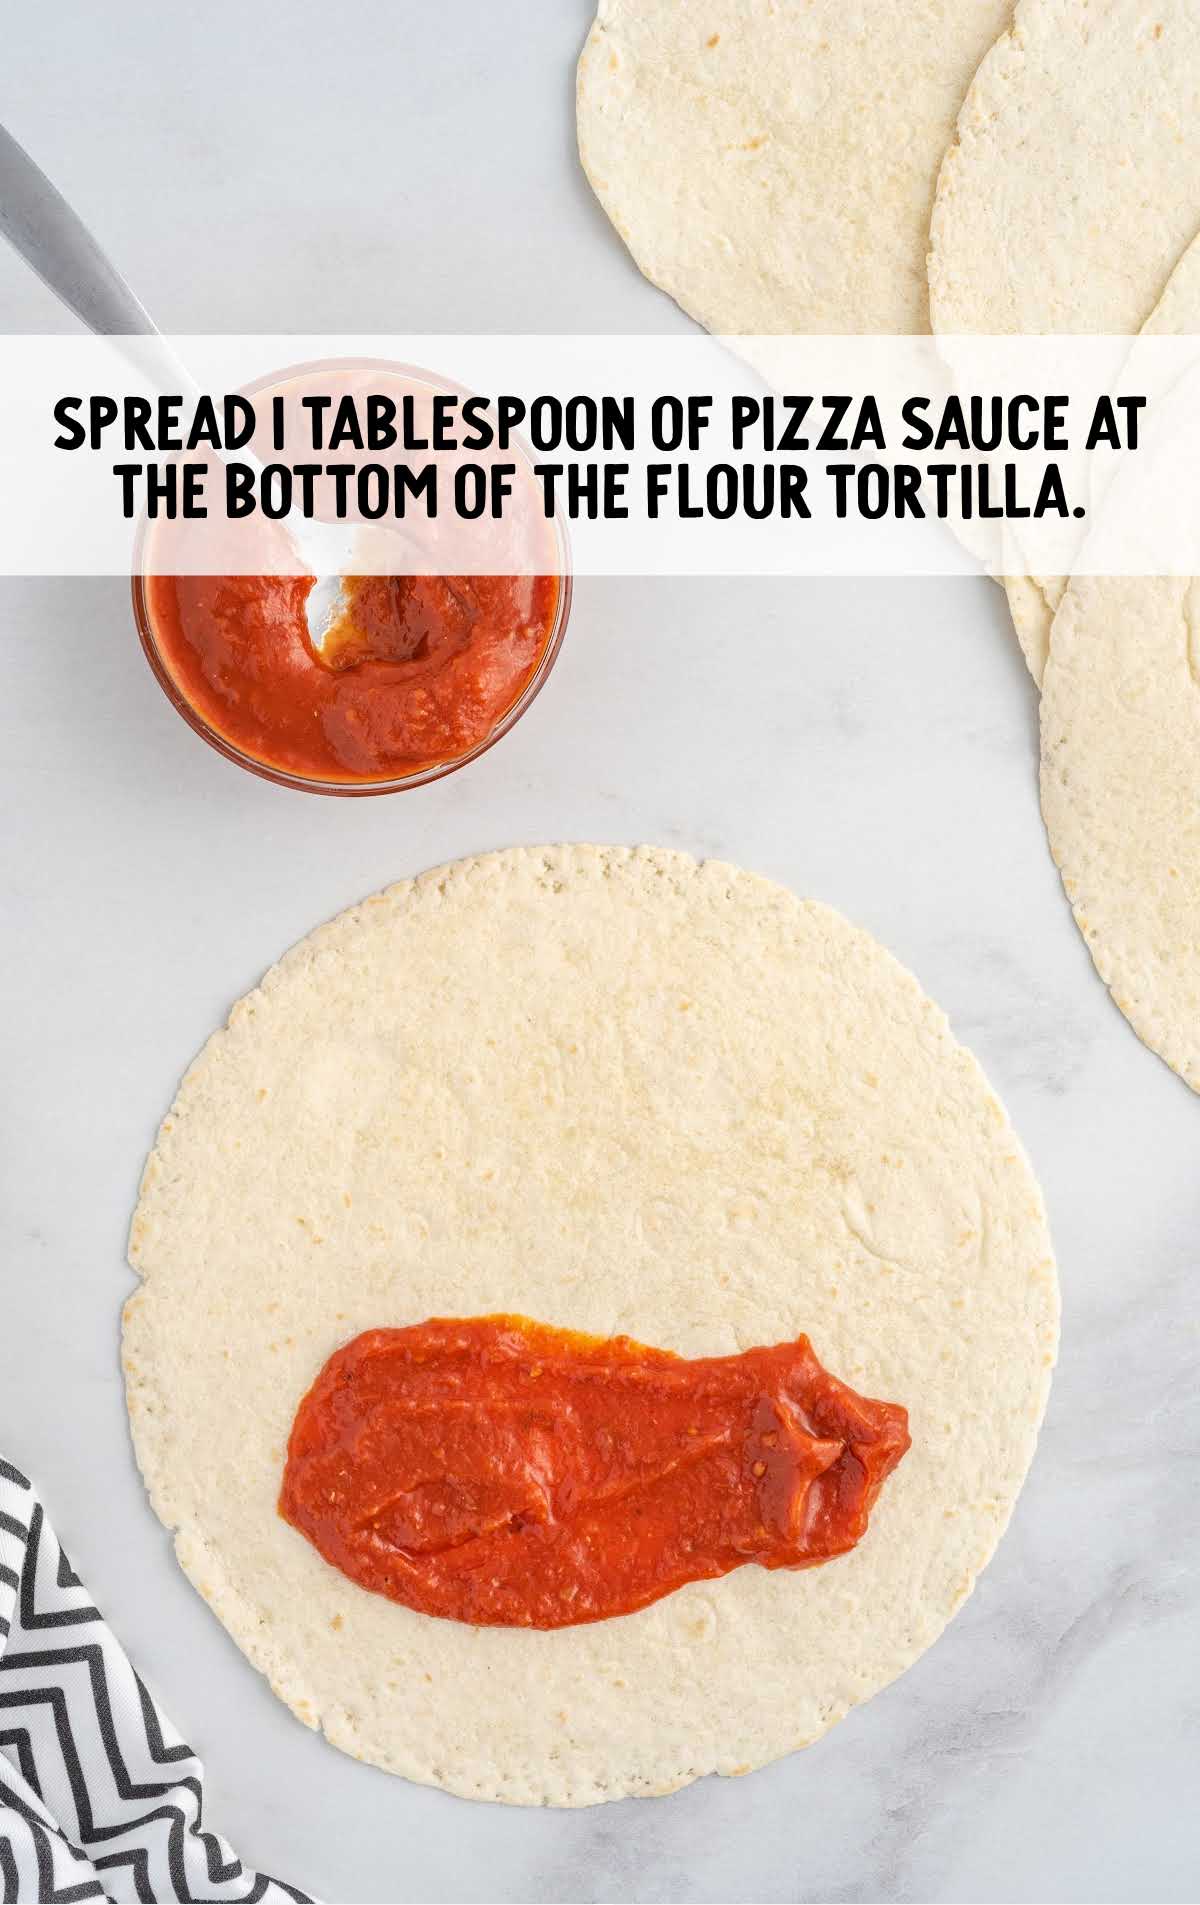 pizza sauce spread on the bottom of the tortilla